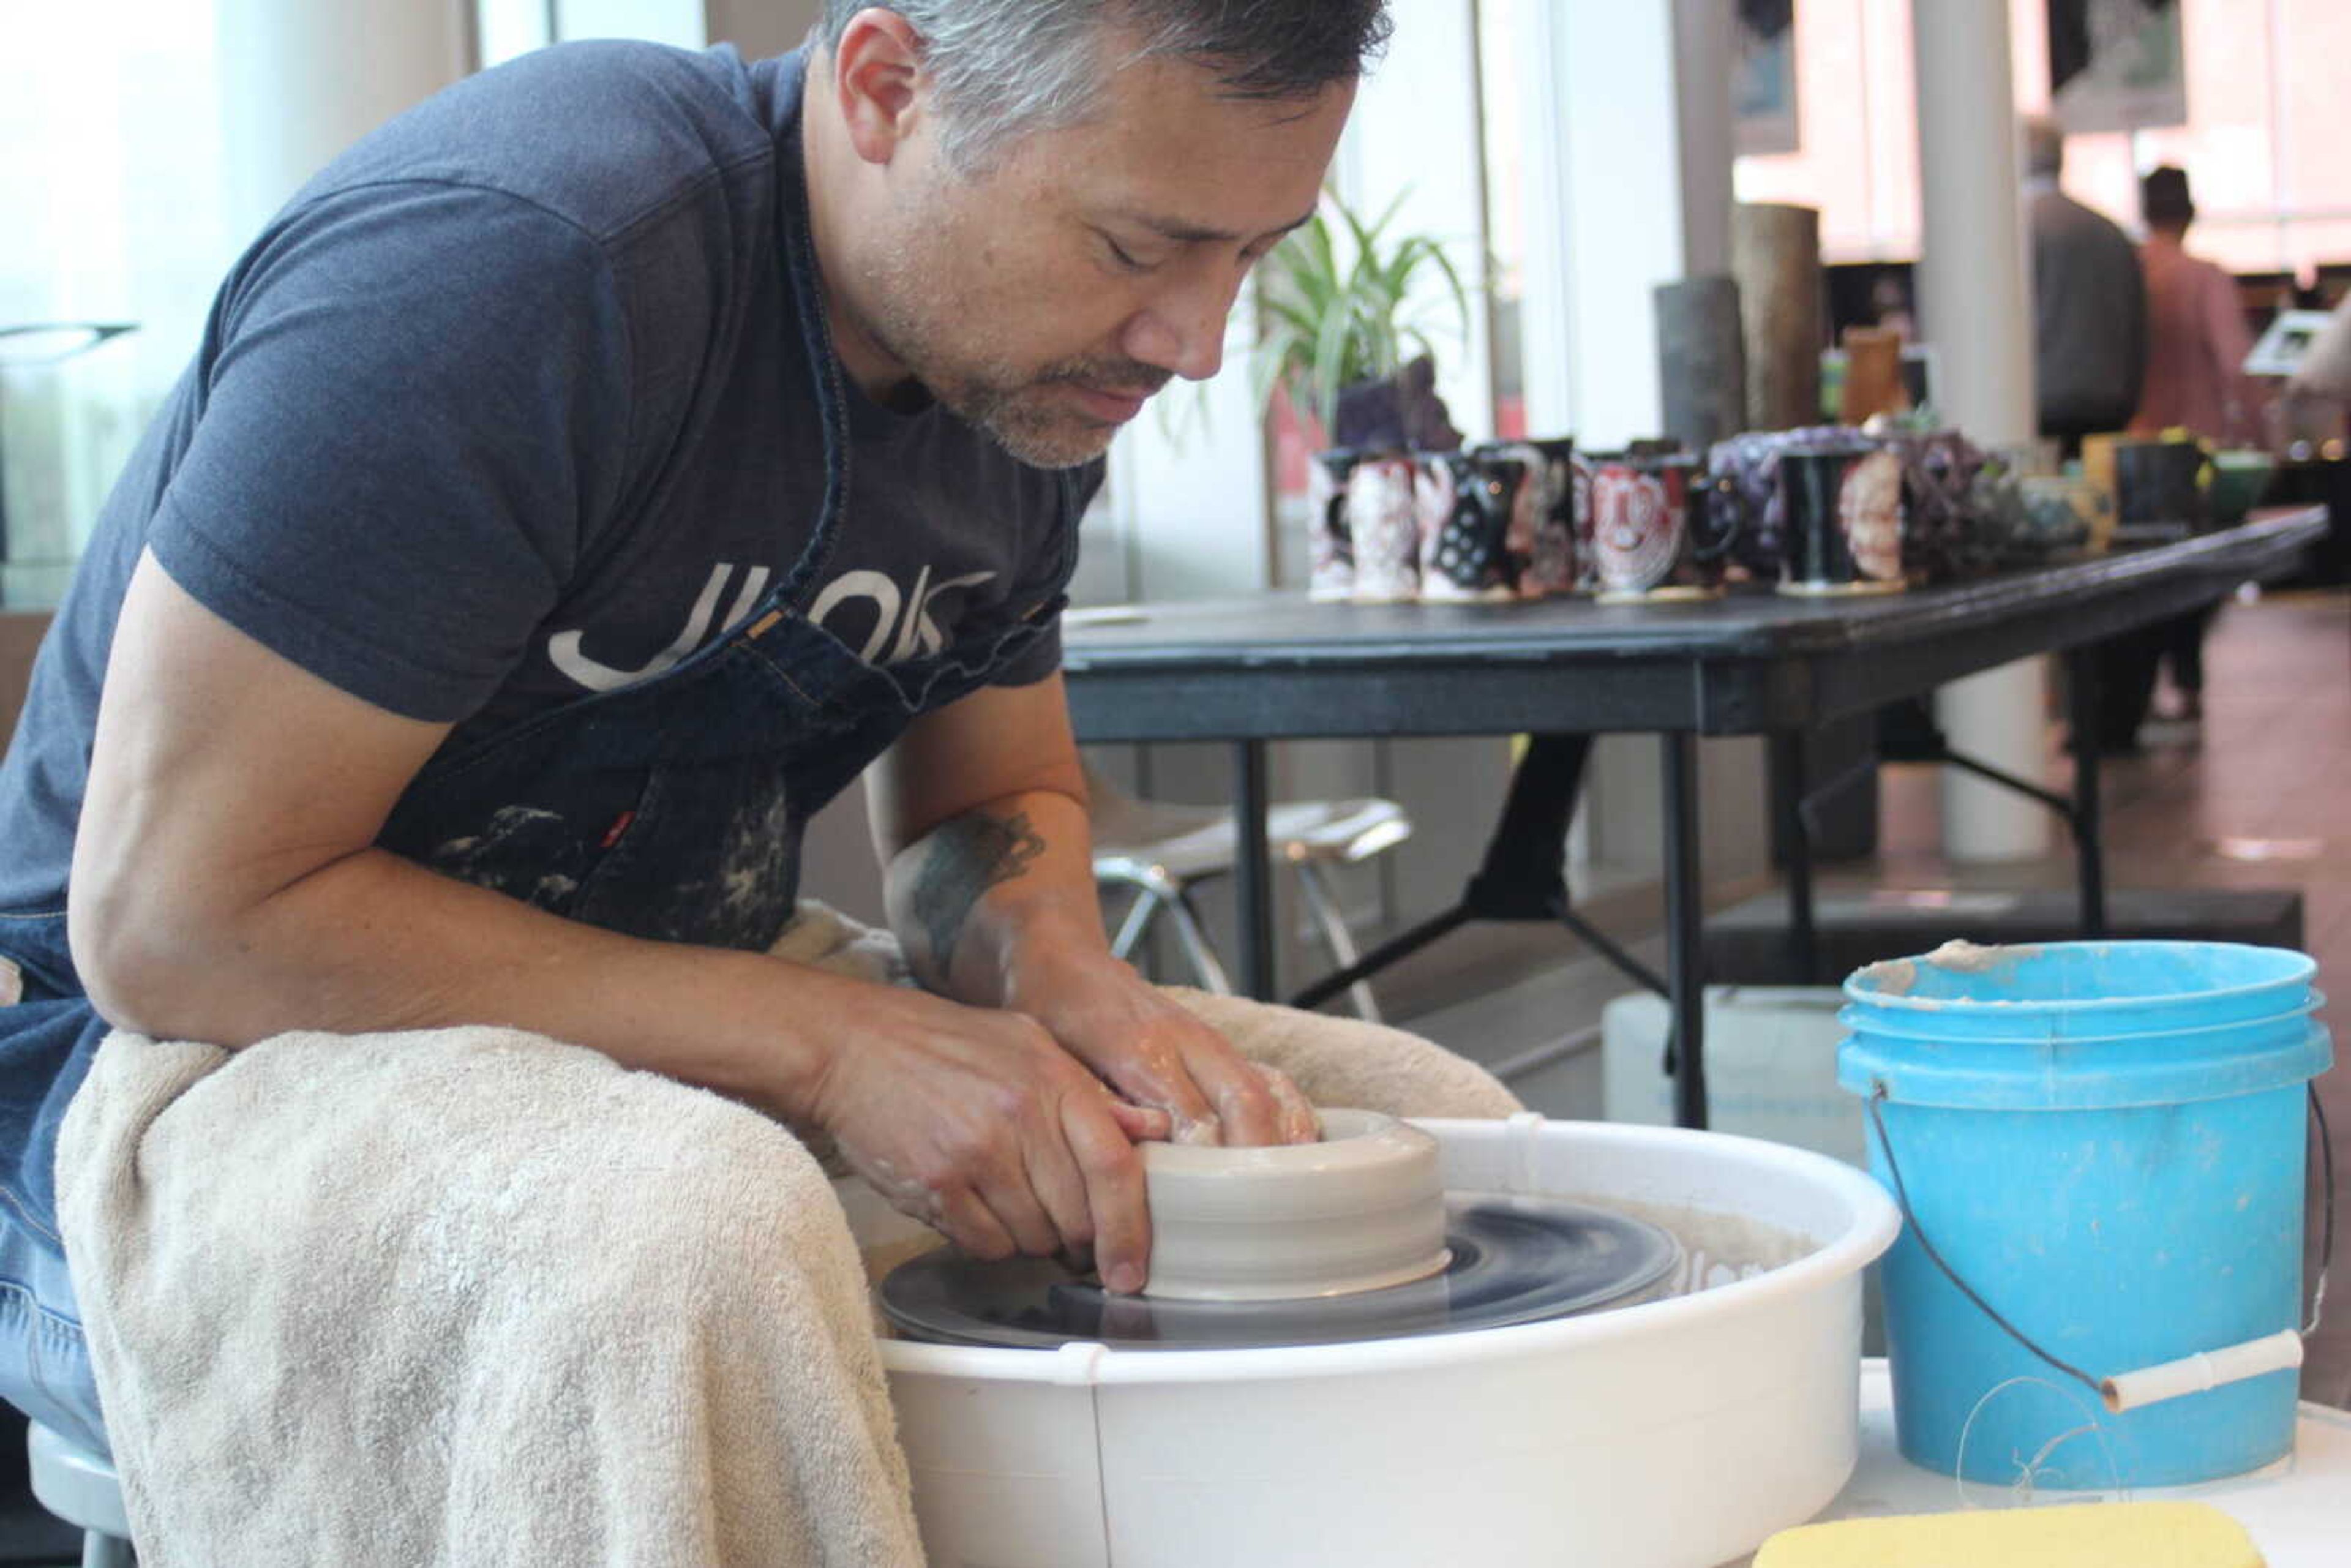 Professor of Art and Ceramics Benji Heu spins a ceramic vase. He said there is not always a financial incentive to pursue arts, but it can be rewarding anyway. “You gotta get a job. Nobody can do things just for fun!”